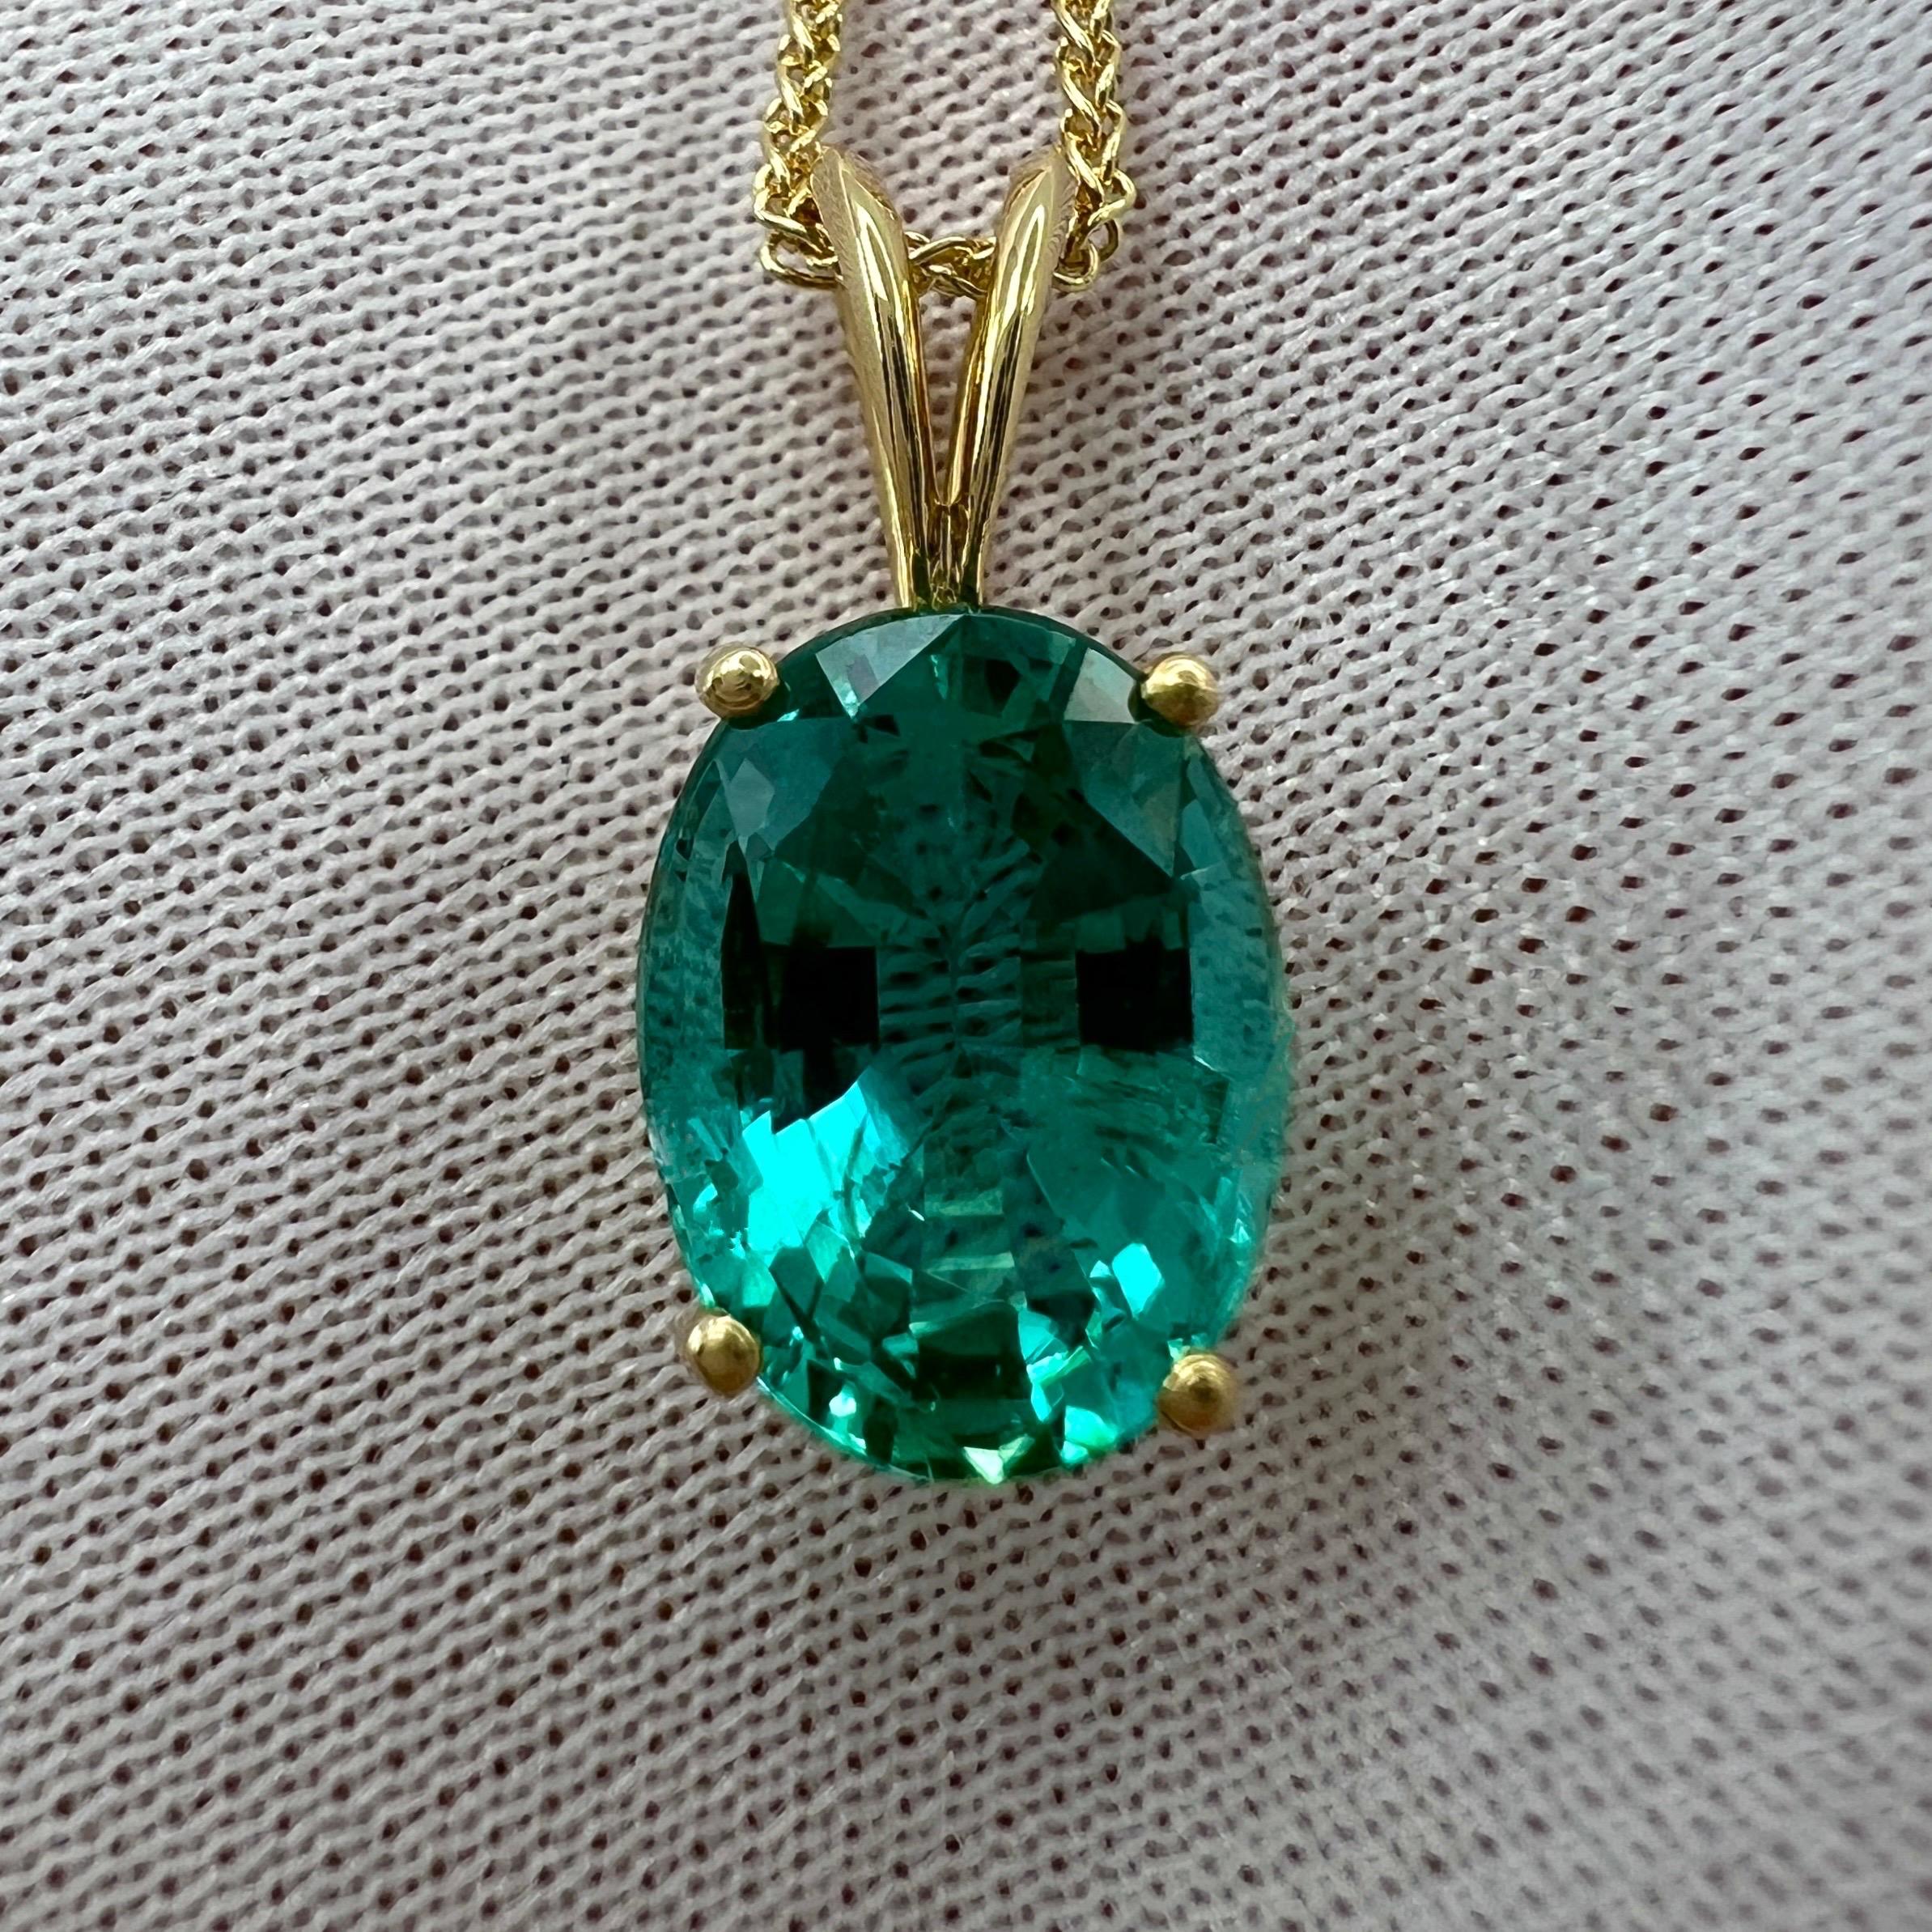 Women's or Men's GIA Certified 2.95ct Vivid Blue Green Oval Cut Emerald 18k Gold Pendant Necklace For Sale